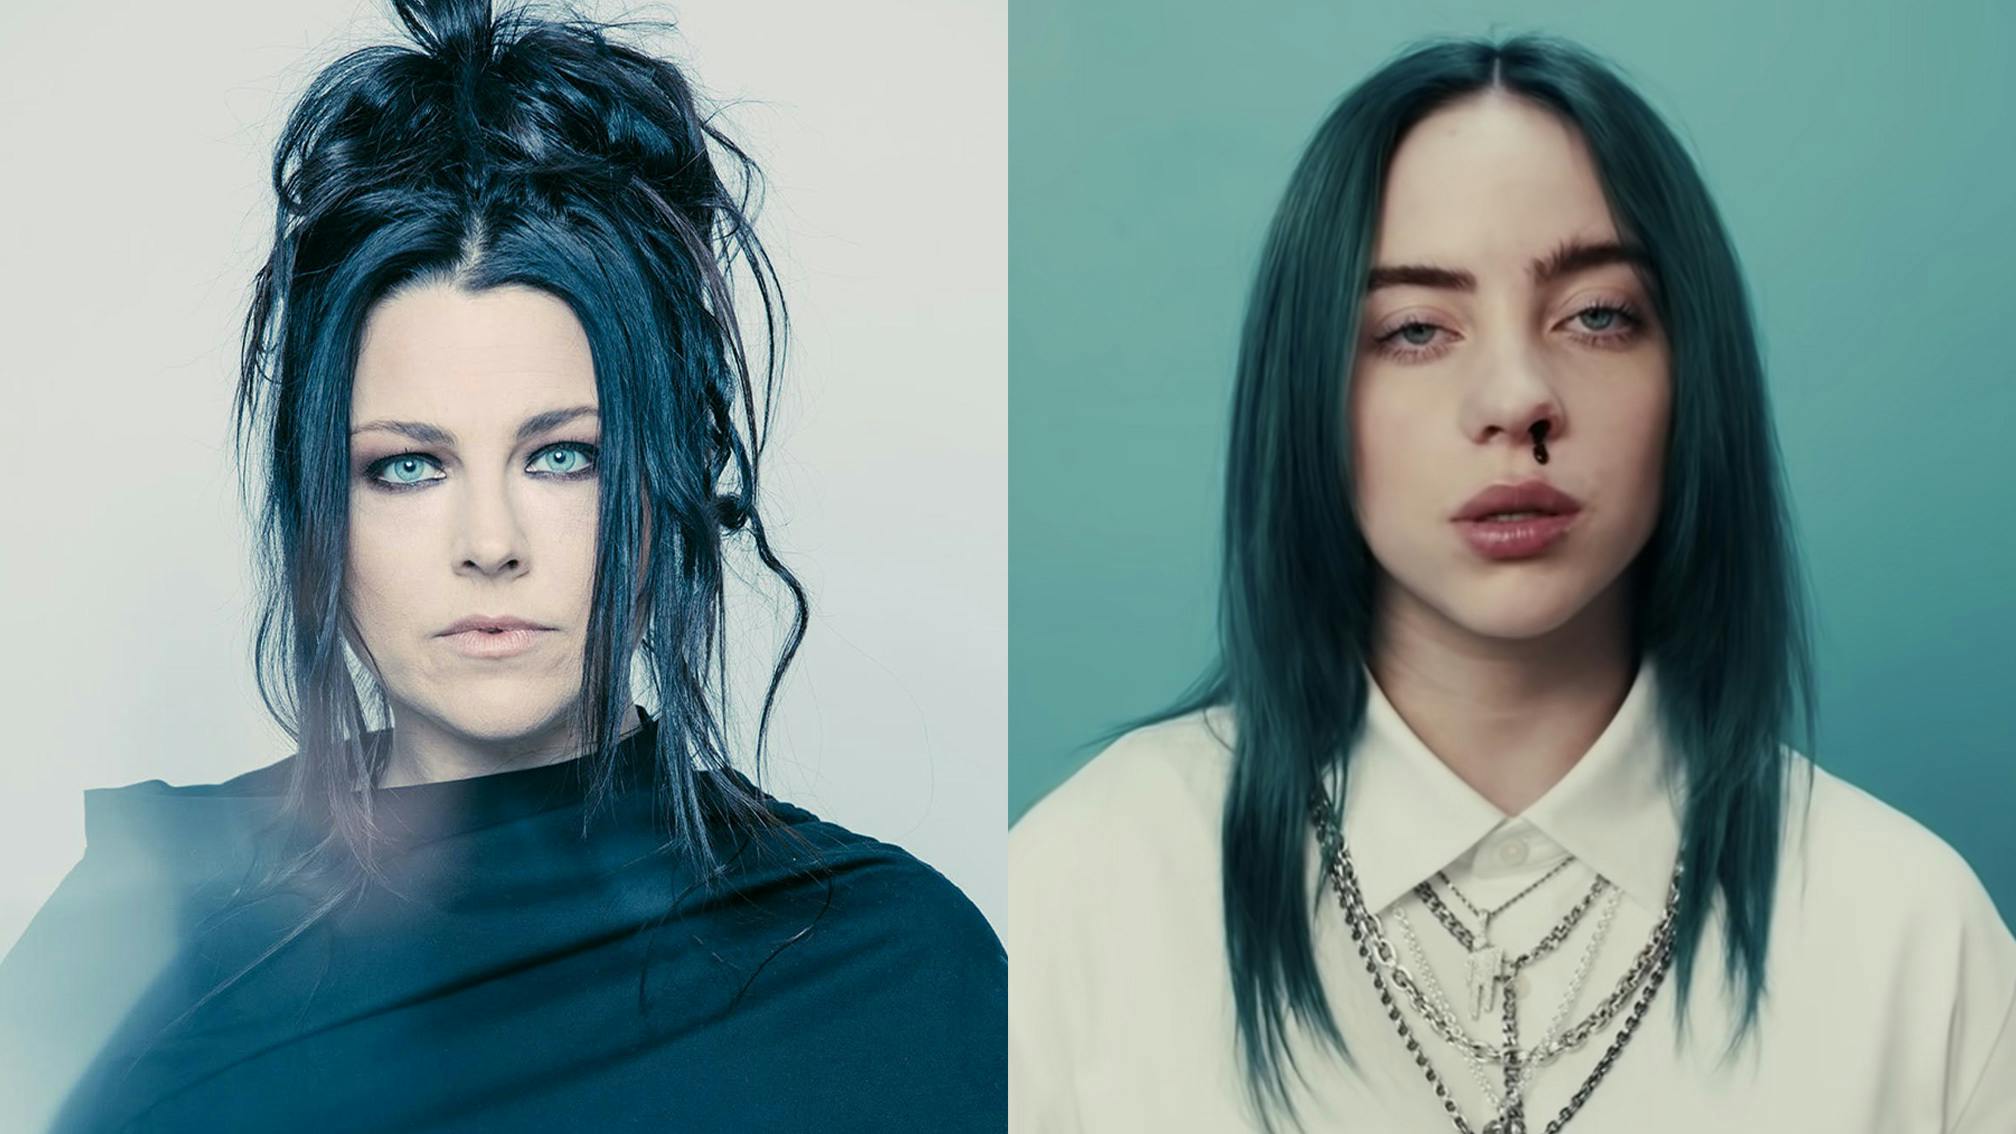 How Billie Eilish inspired Evanescence's Amy Lee: "She’s just being completely herself"